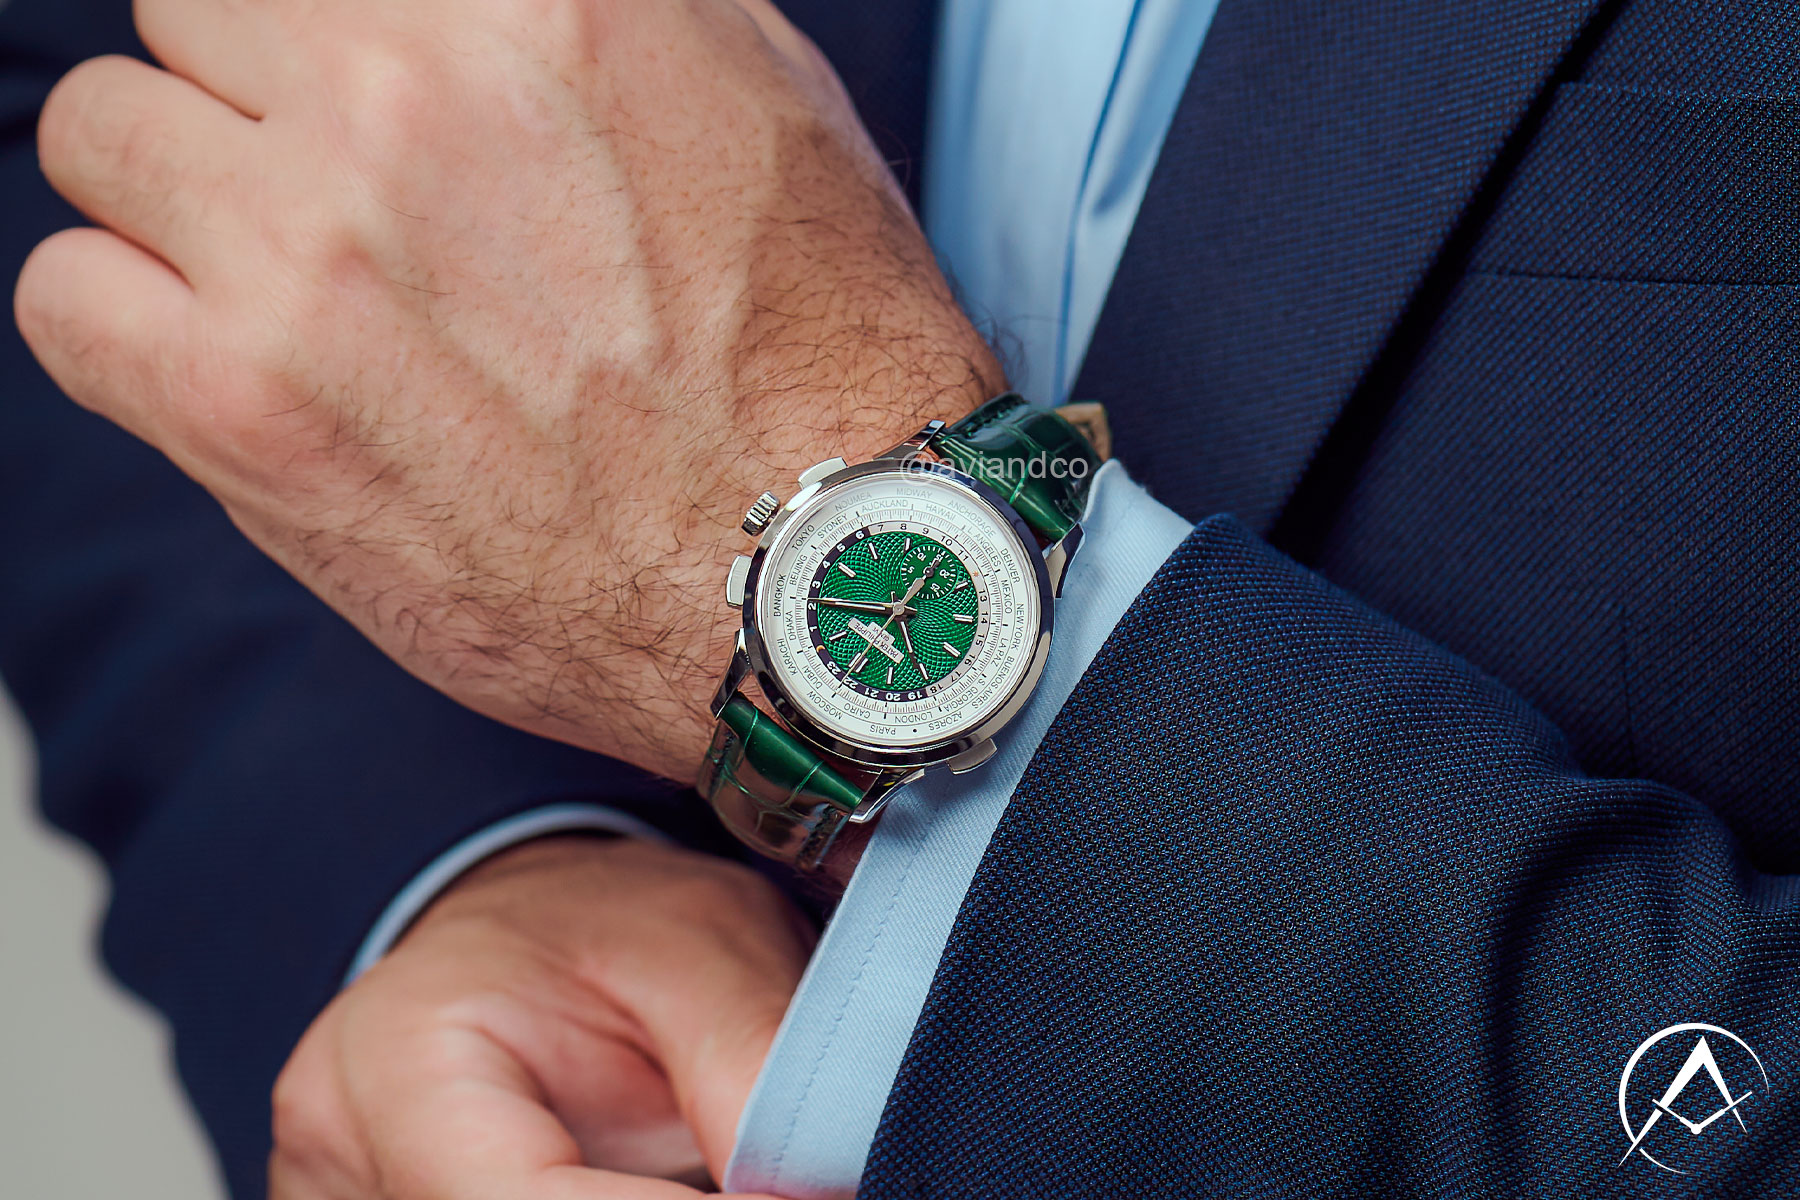 Patek Philippe Timepiece with Green Index Dial and Green Leather Strap Displayed on a Man’s Wrist Wearing a Navy Suit.